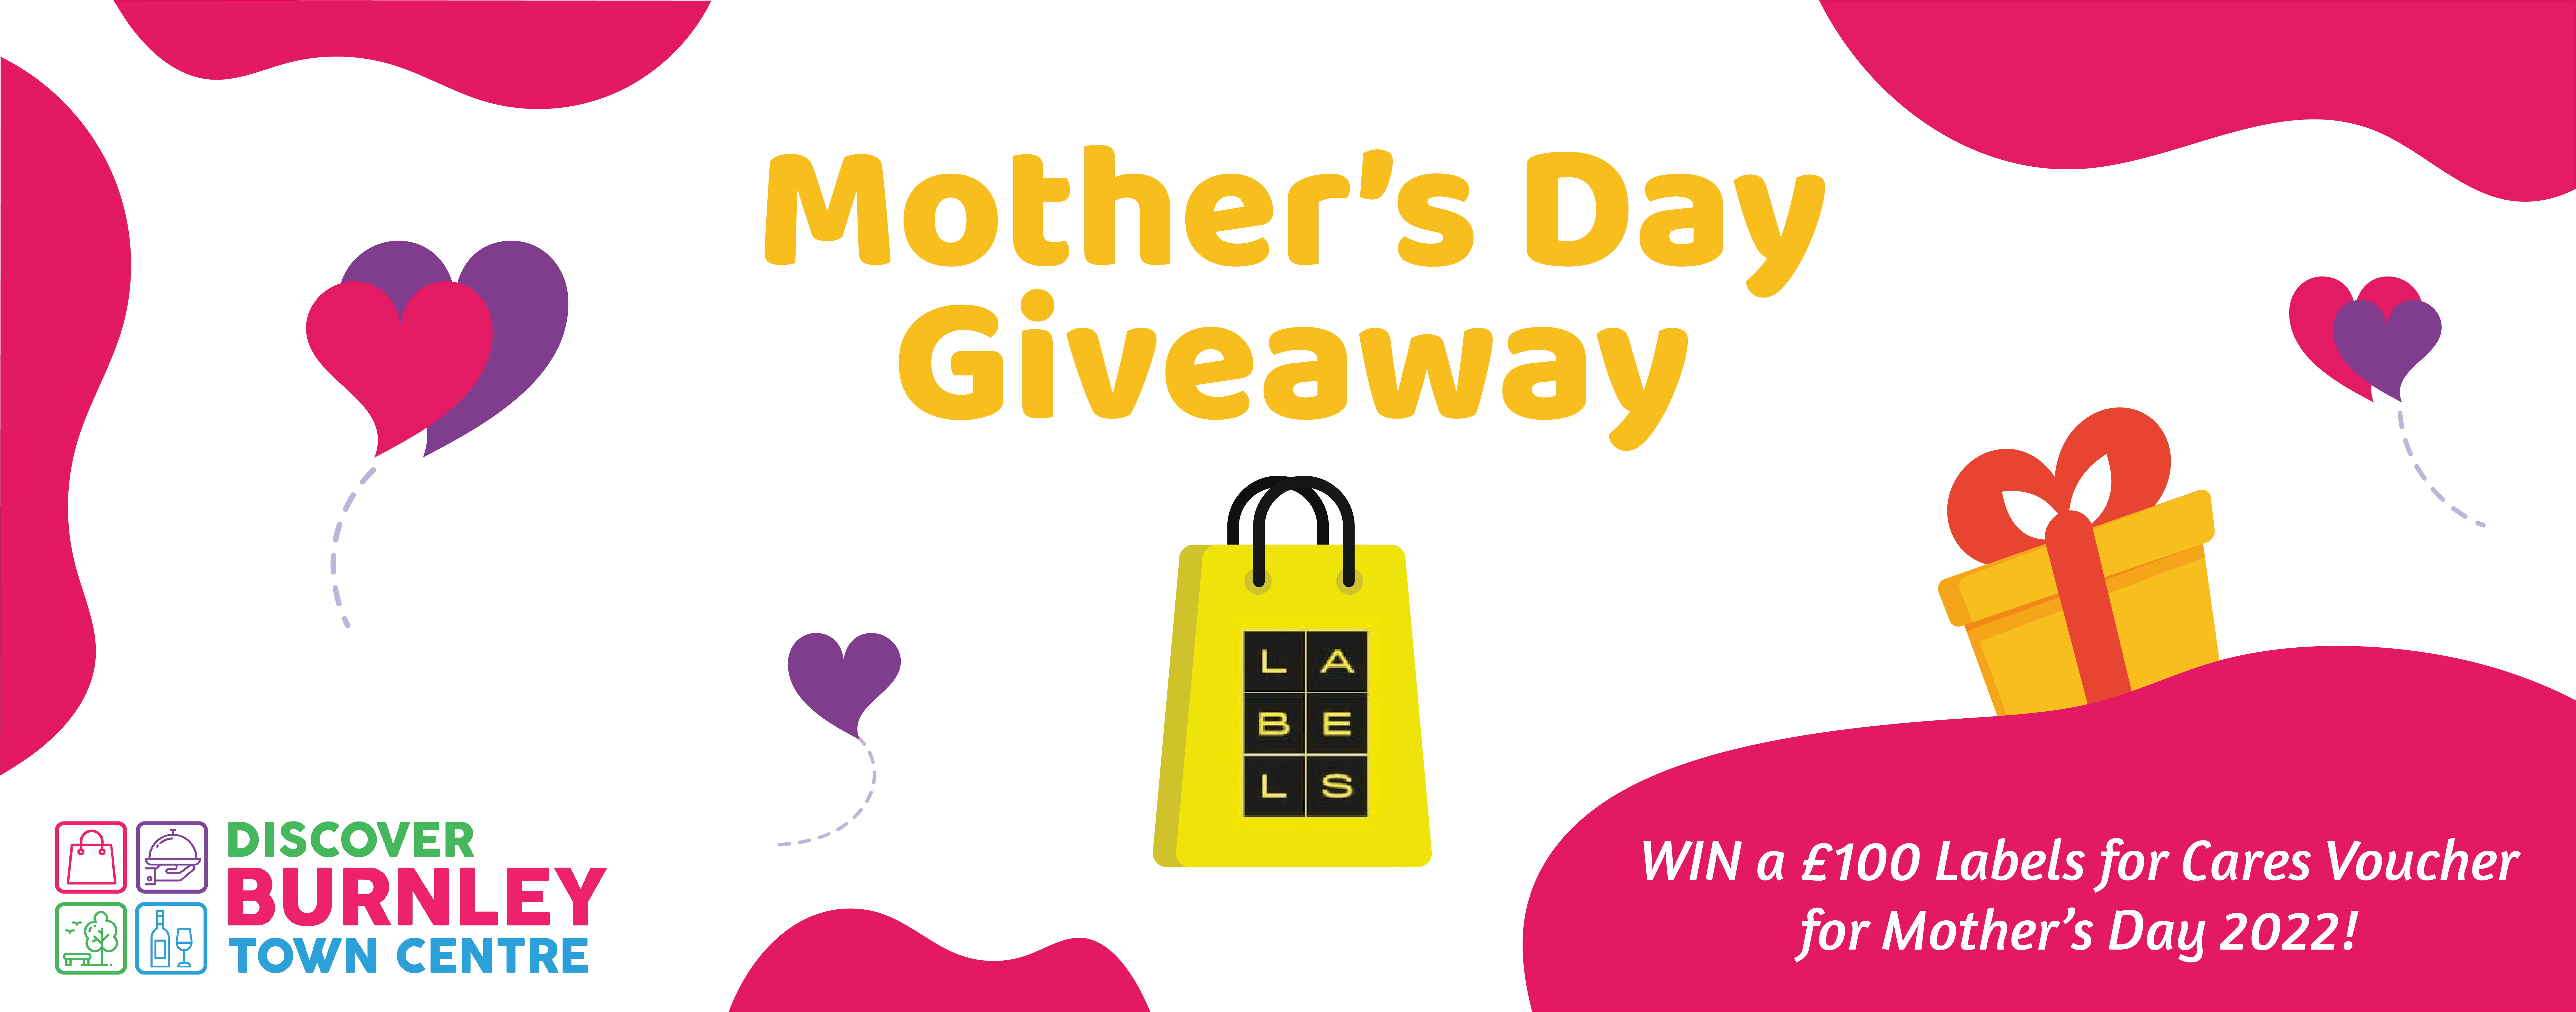 Discover Burnley presents a Mother's Day giveaway